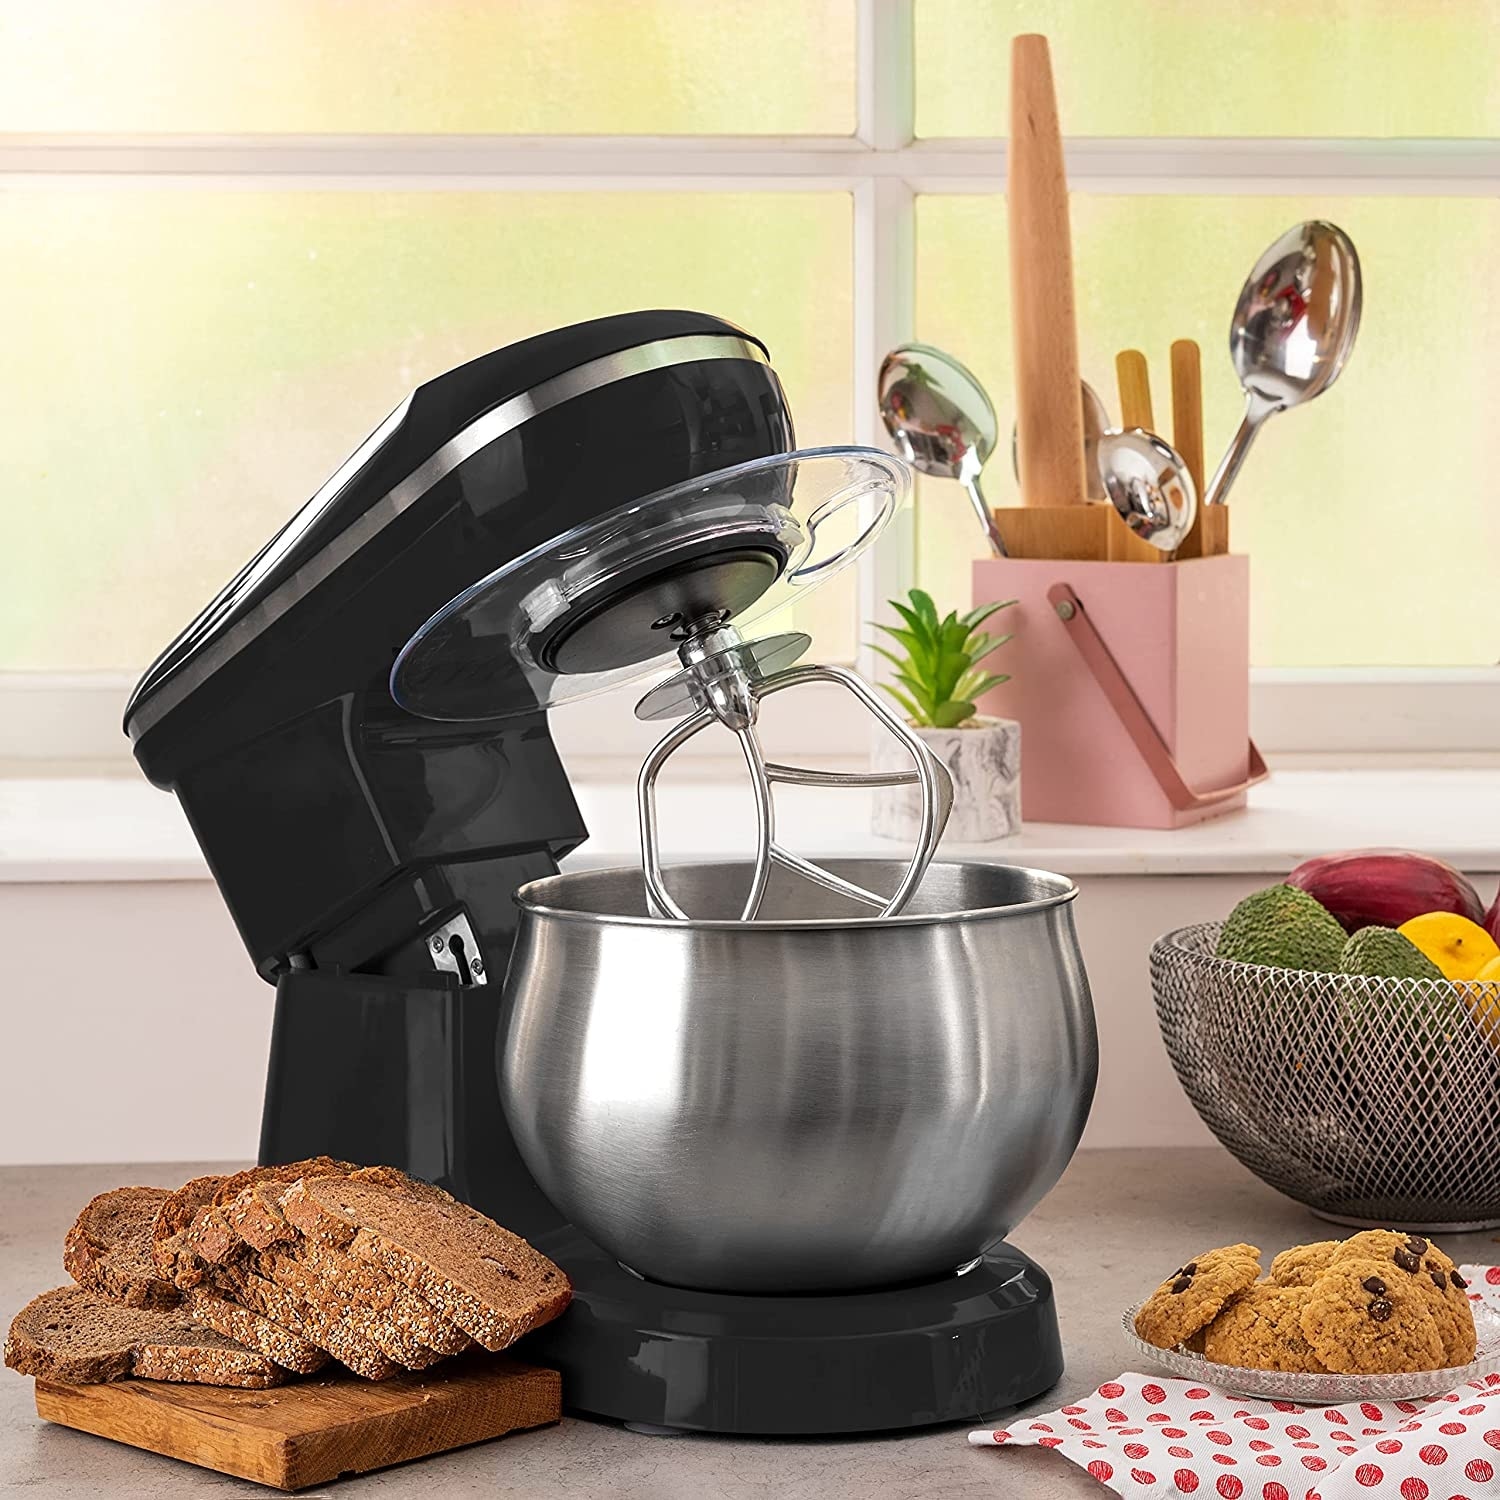 https://ak1.ostkcdn.com/images/products/is/images/direct/652ffd2c29e129687c8df2e0d3cc60c4060e1551/Stone-Stand-Mixer%2C-6-Speed-Electric-Mixer-With-5.5-Quart-Stainless-Steel-Mixing-Bowl%2C-Black-Body-Kitchen-Mixer-With-Dough-Hook.jpg